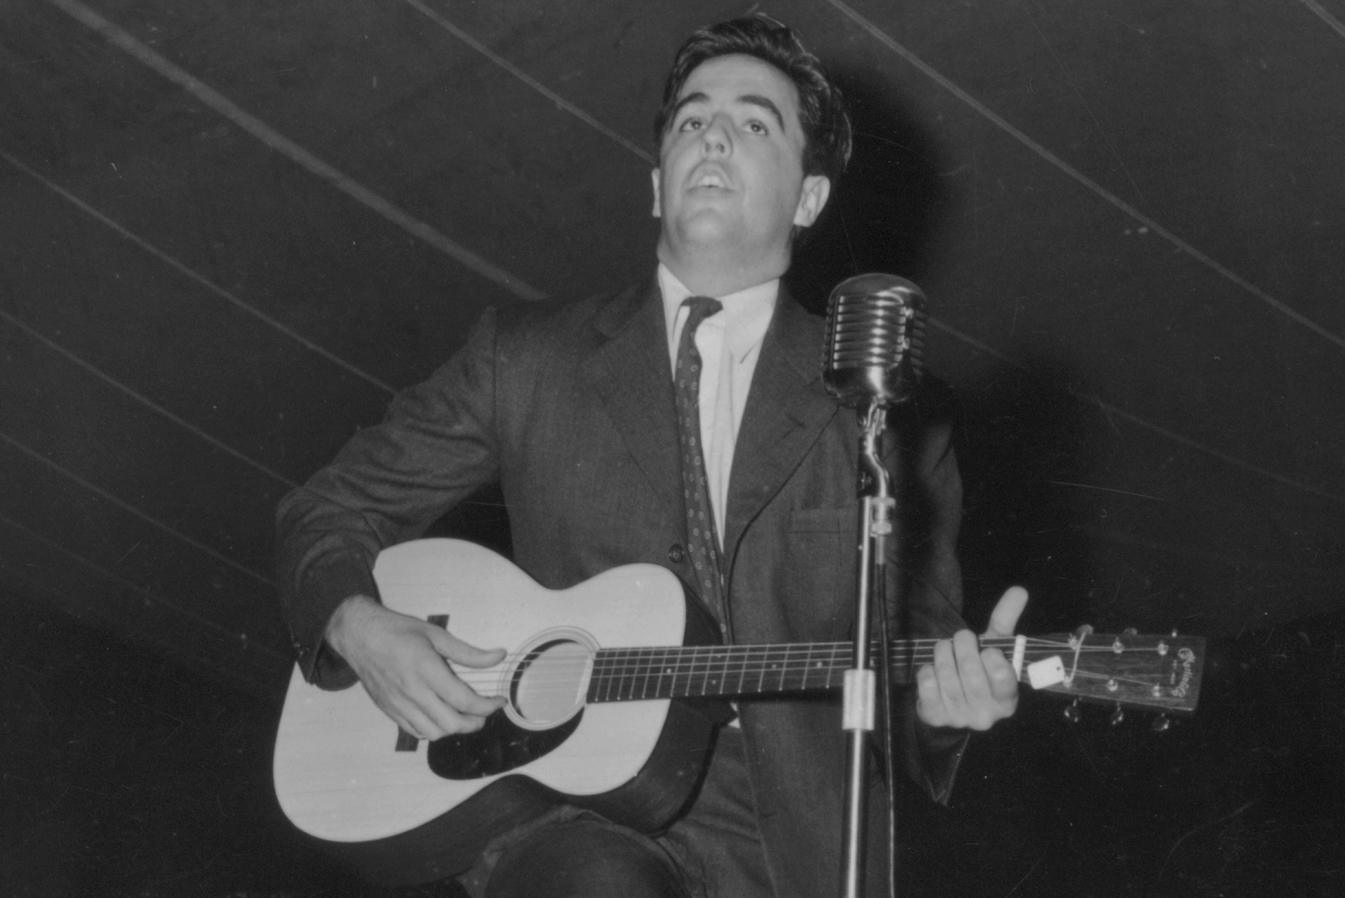 Alan Lomax's Massive Collection of Field Recordings Goes Digital